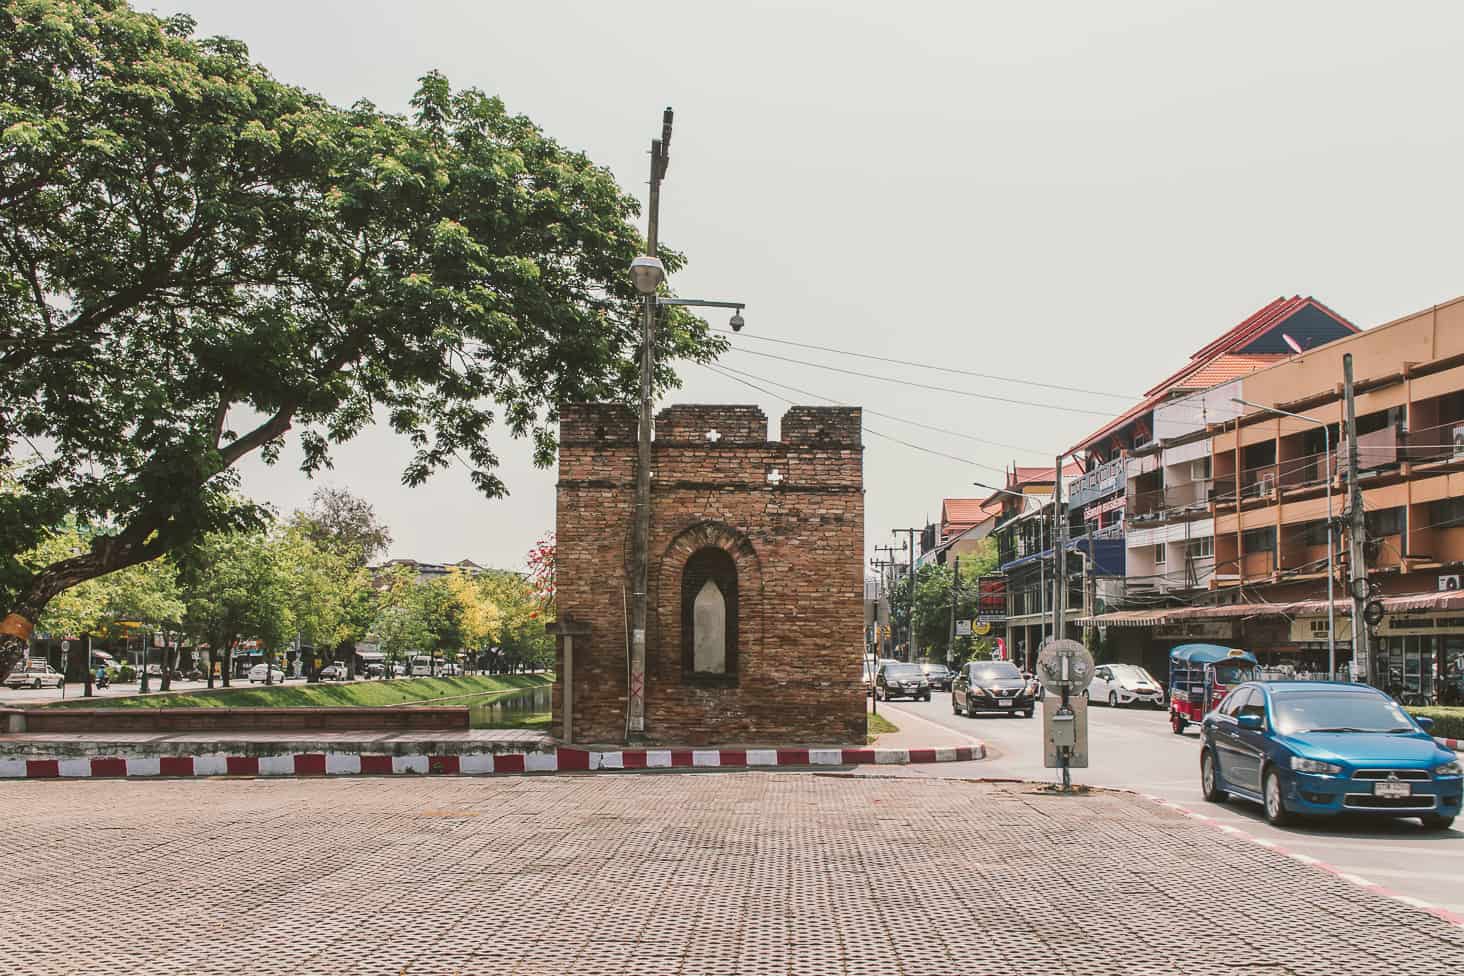 Photograph the gates - Things to do in Chiang Mai